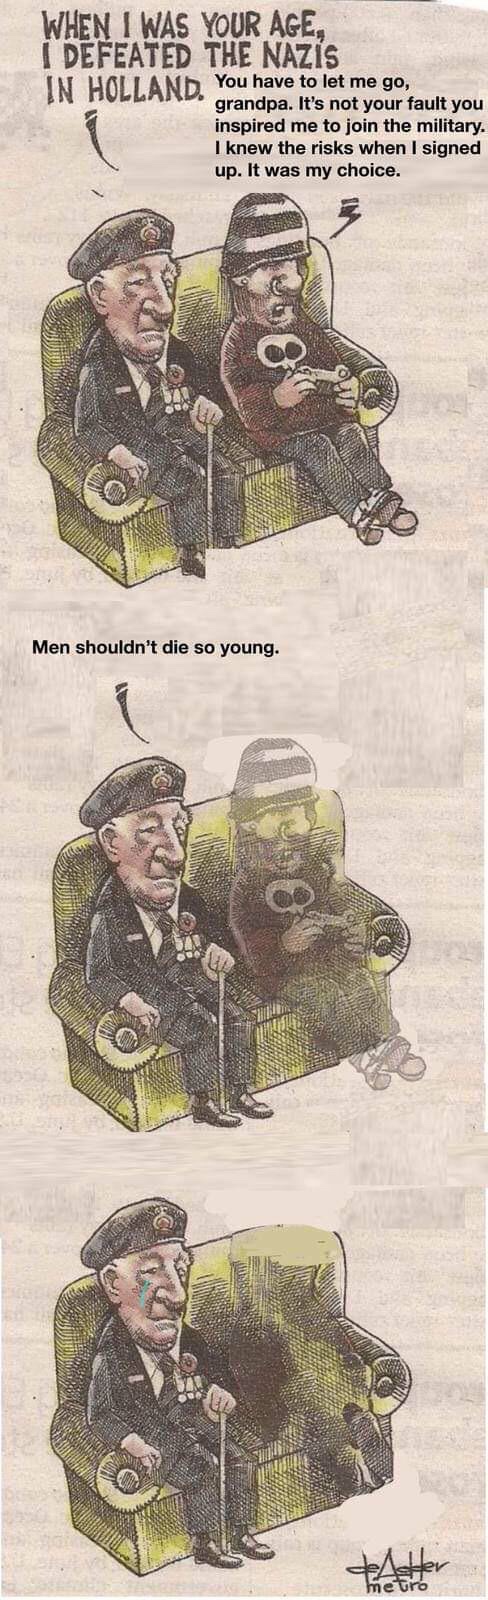 it's not your fault let meme - When I Was Your Age, I Defeated The Nazis You have to let me go, grandpa. It's not your fault you inspired me to join the military. I knew the risks when I signed up. It was my choice. Men shouldn't die so young. Atter metro